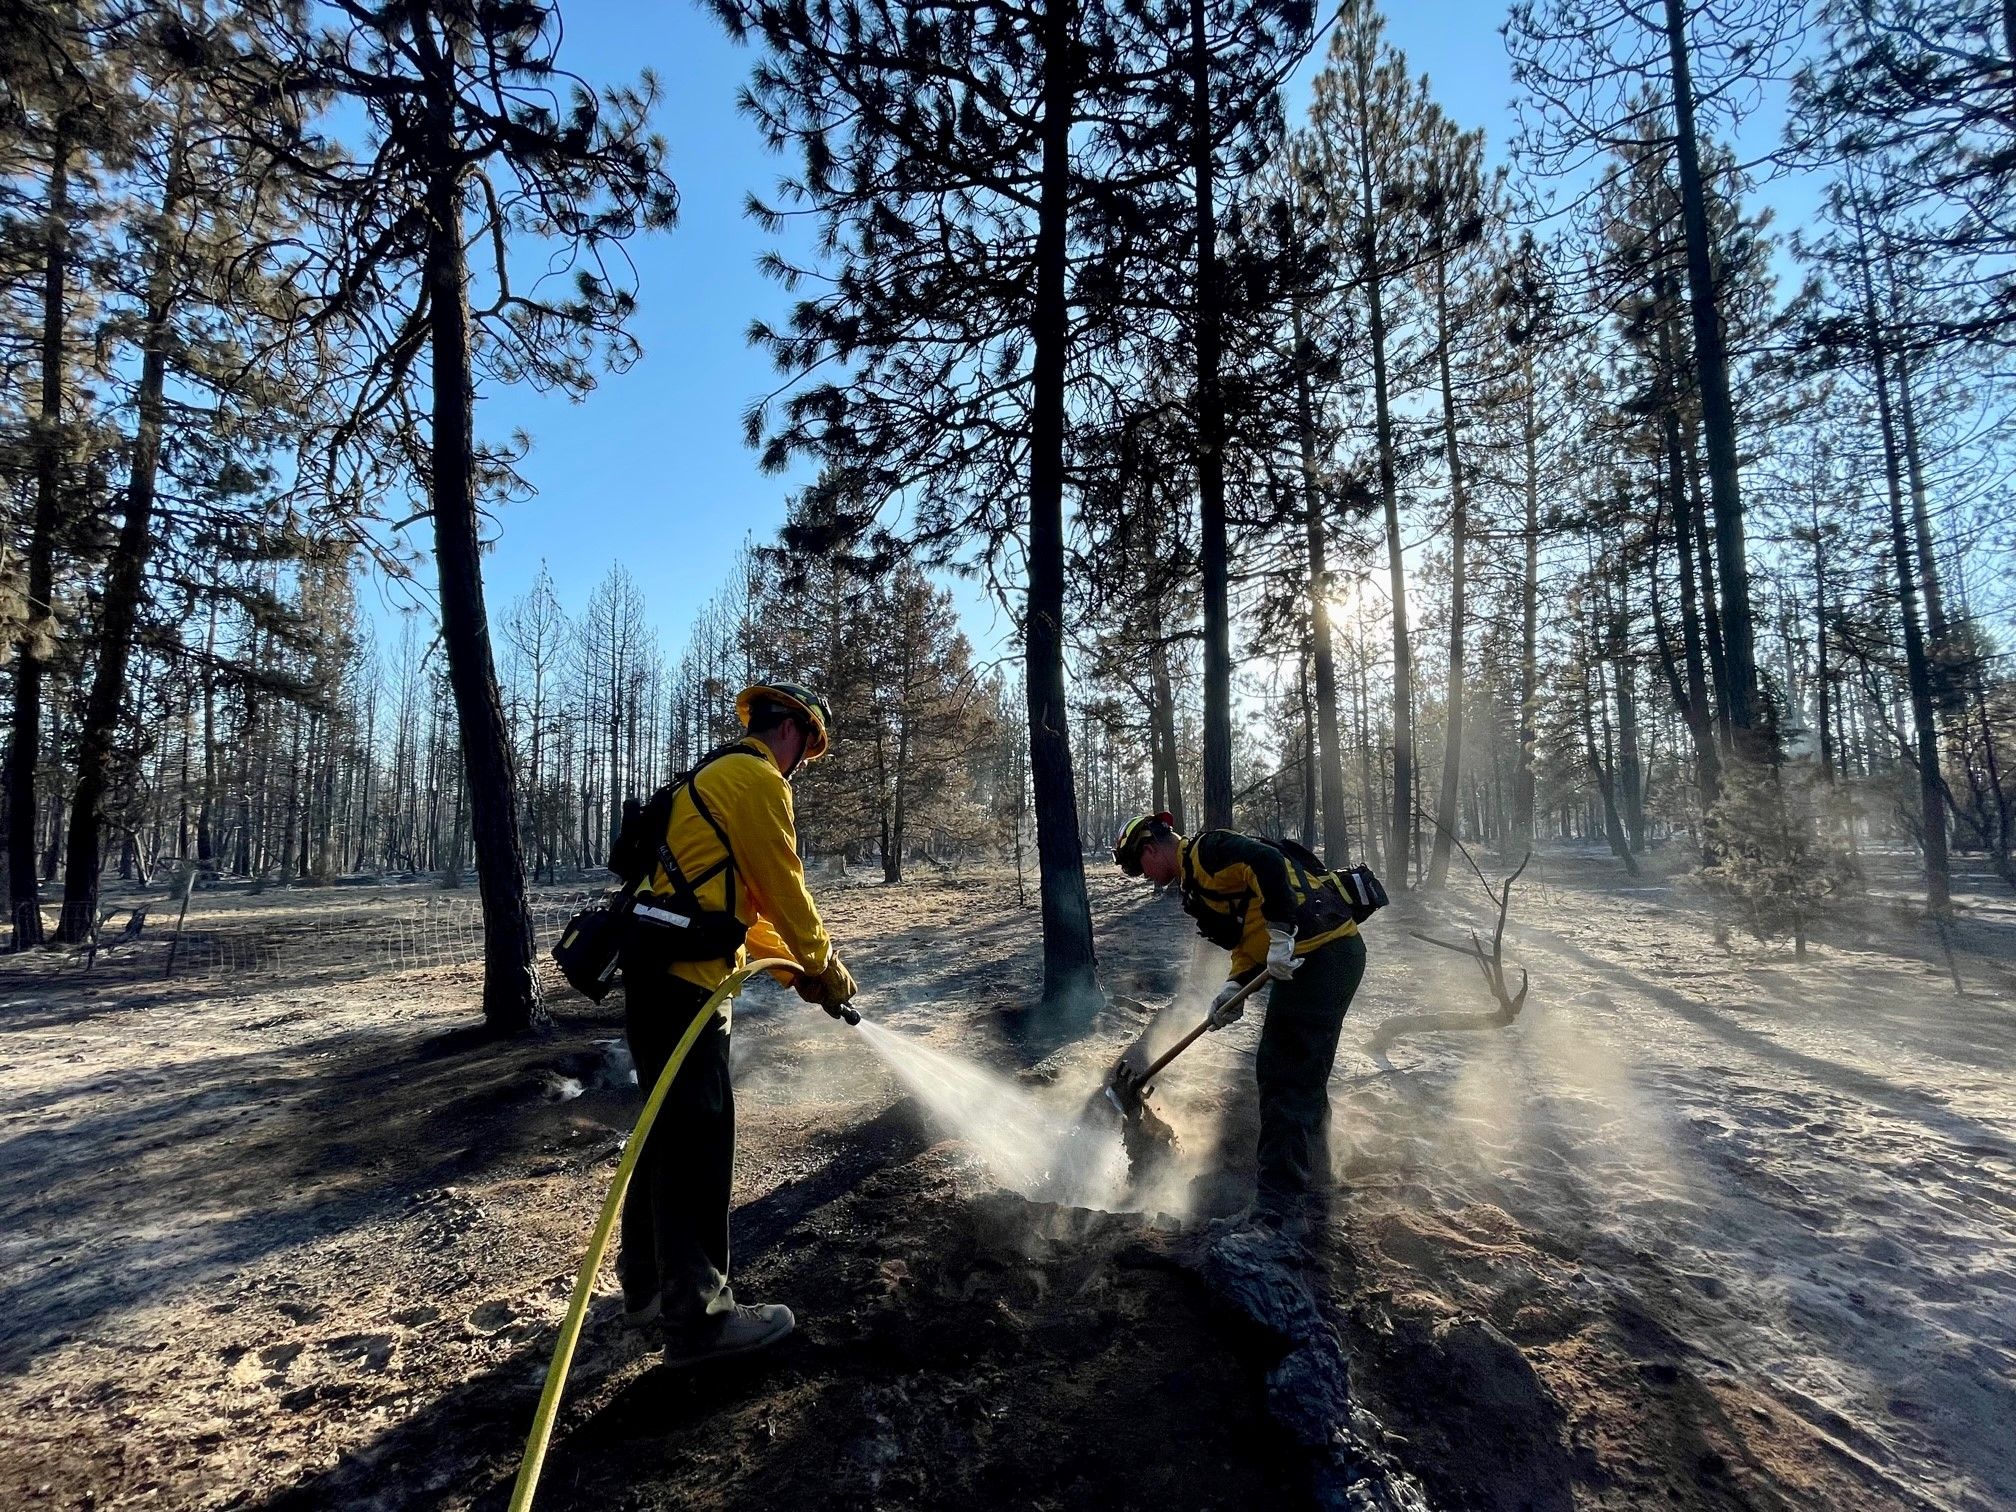 Oregon firefighting crews crews are working to put out hot spots, conduct damage assessments, and improve fire lines as they respond to the Golden Fire in Klamath County.